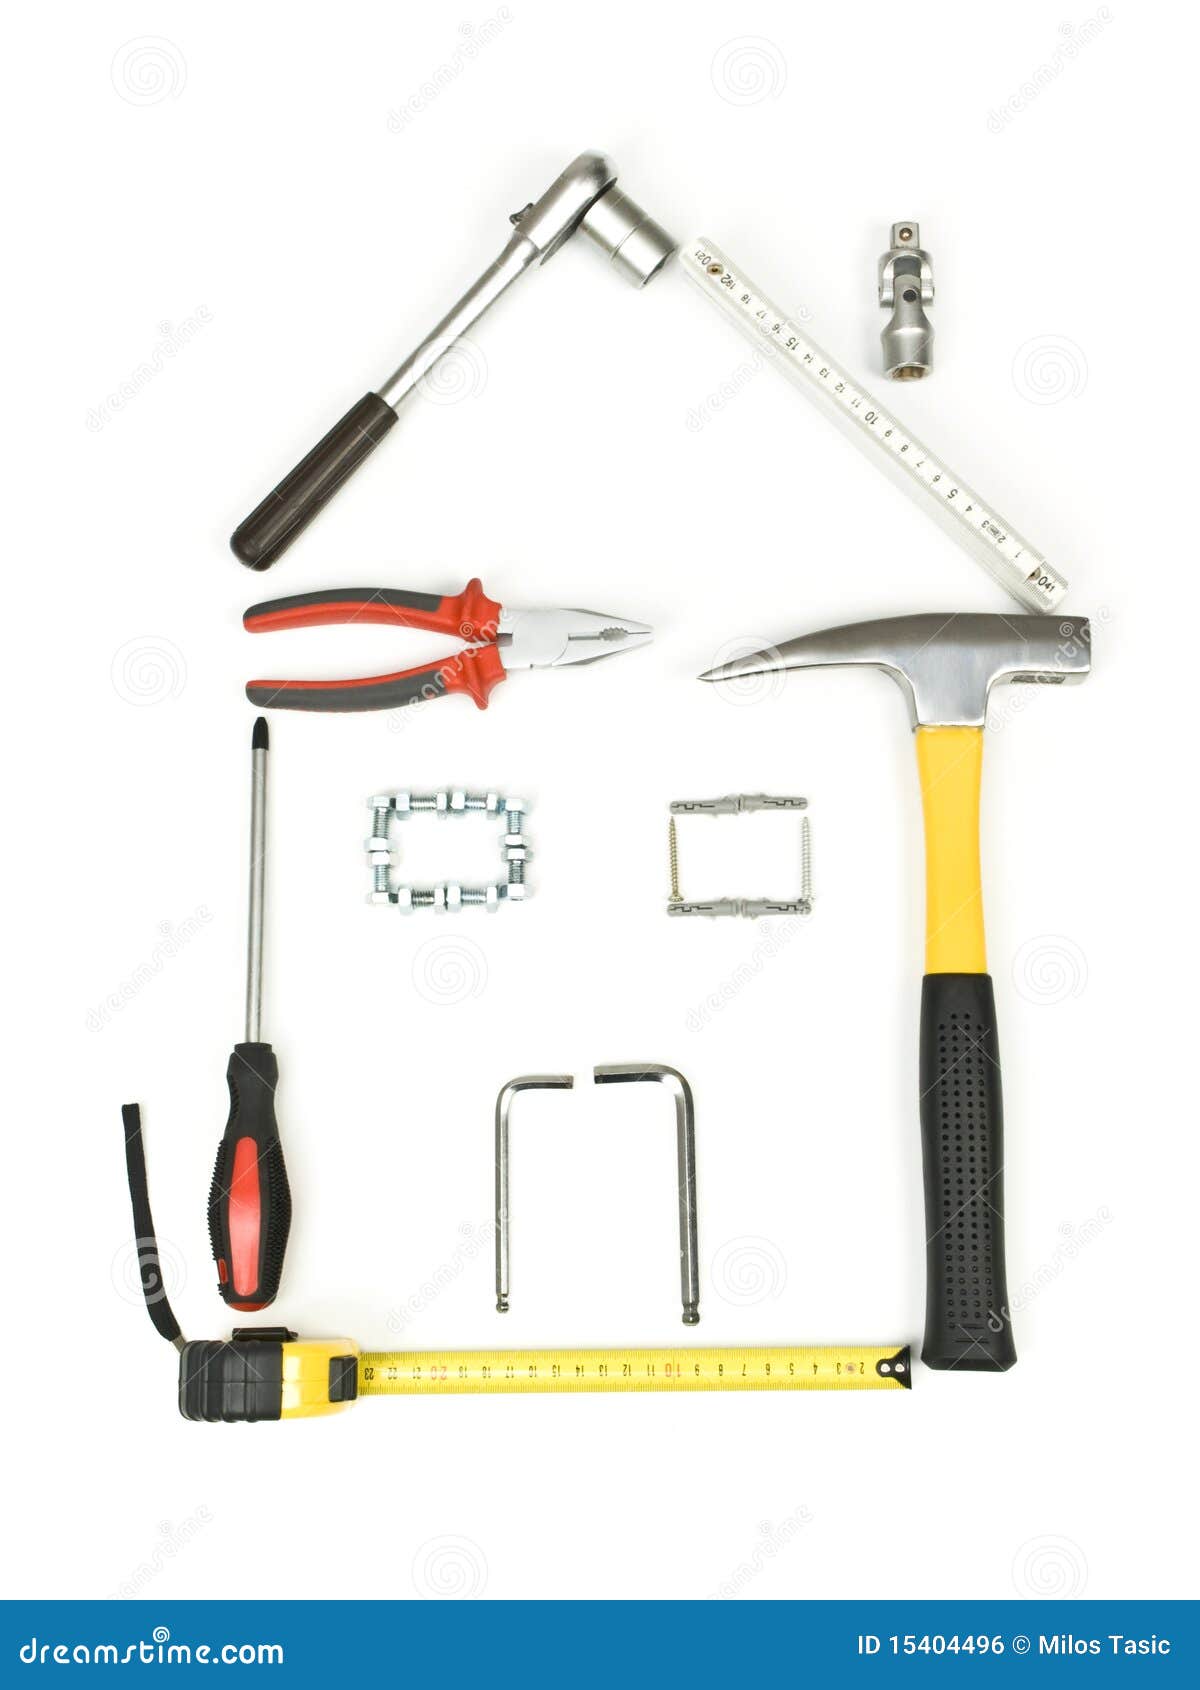 Carpenter Tools Hummer, G-clamp, Plane and Chisels Stock Photo by  ©Rostislavv 69313563